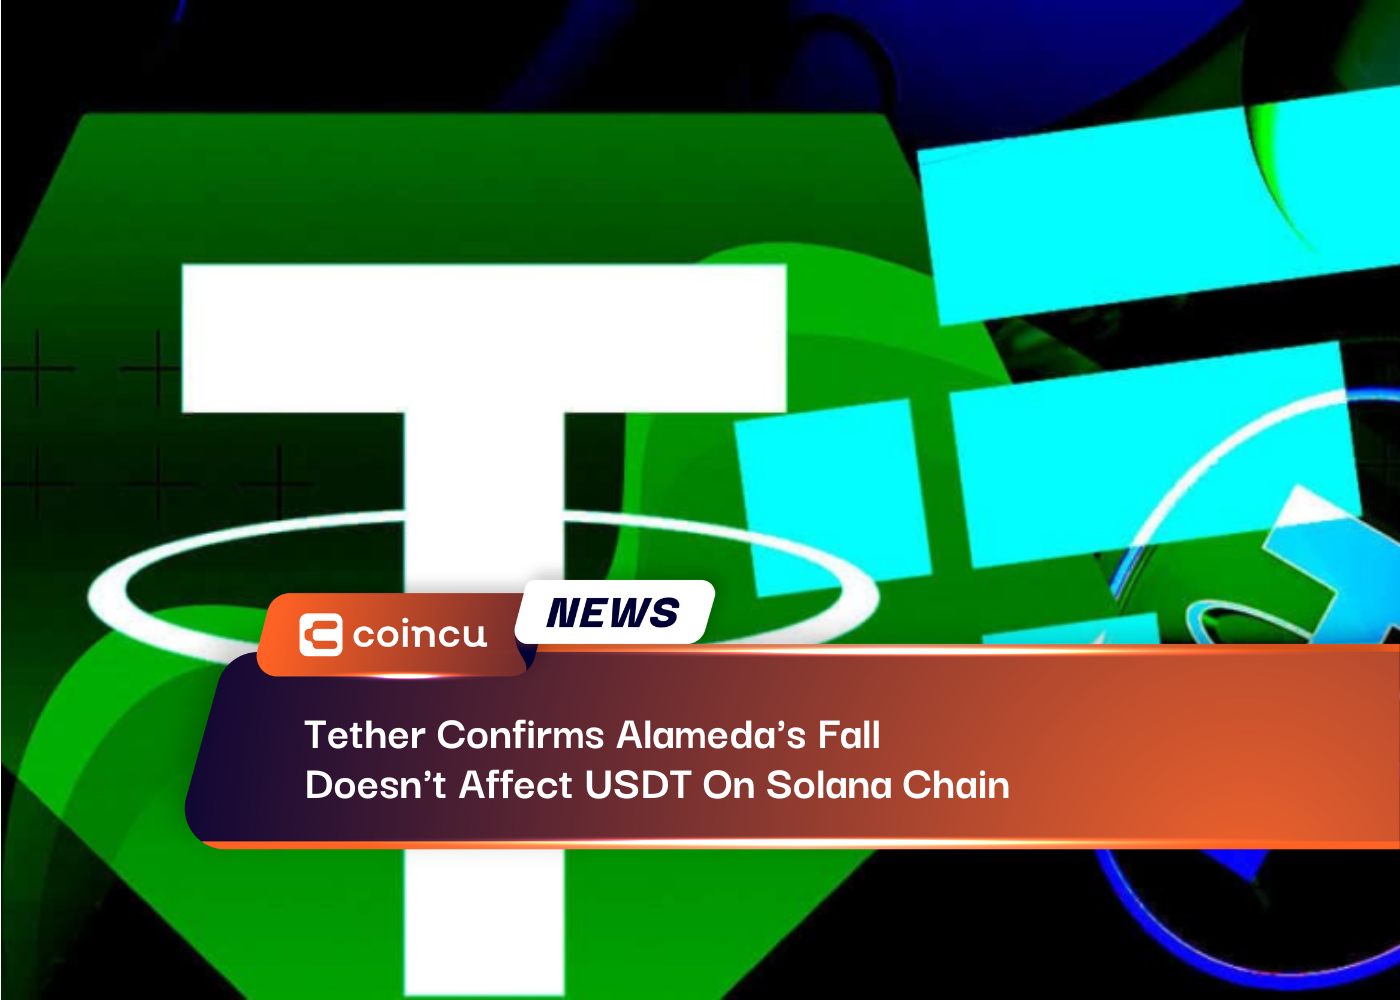 Tether Confirms Alameda's Fall Doesn't Affect USDT On Solana Chain